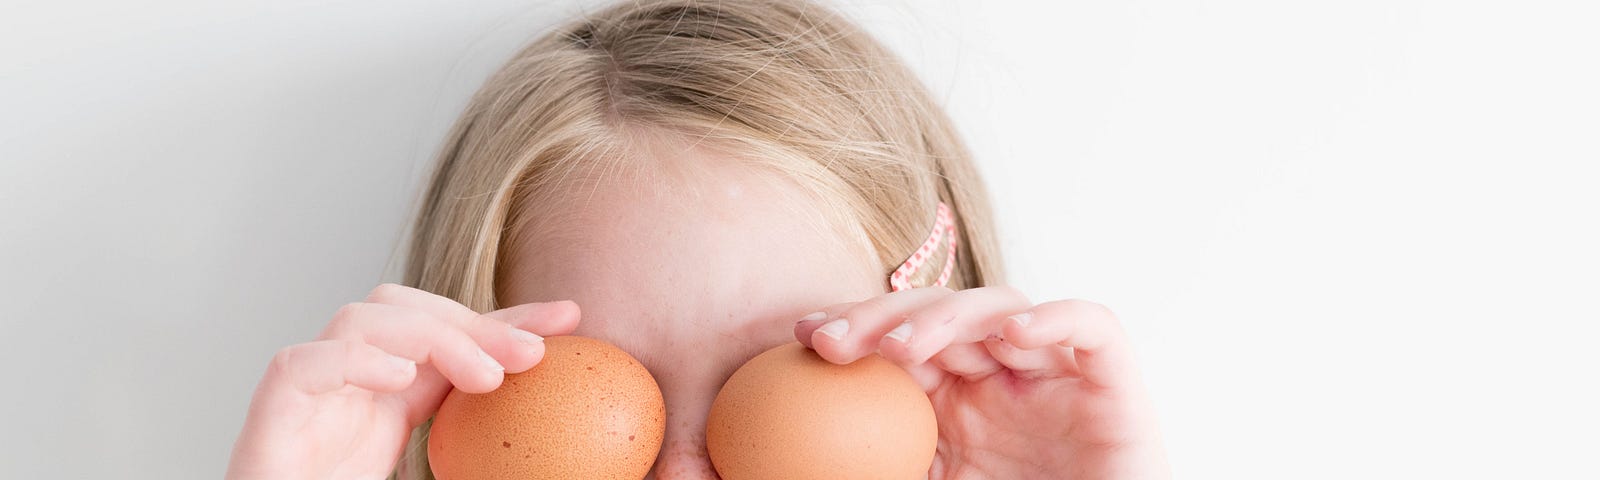 A young girl holding fresh eggs over her eyes — Not unlike my first baking experience!